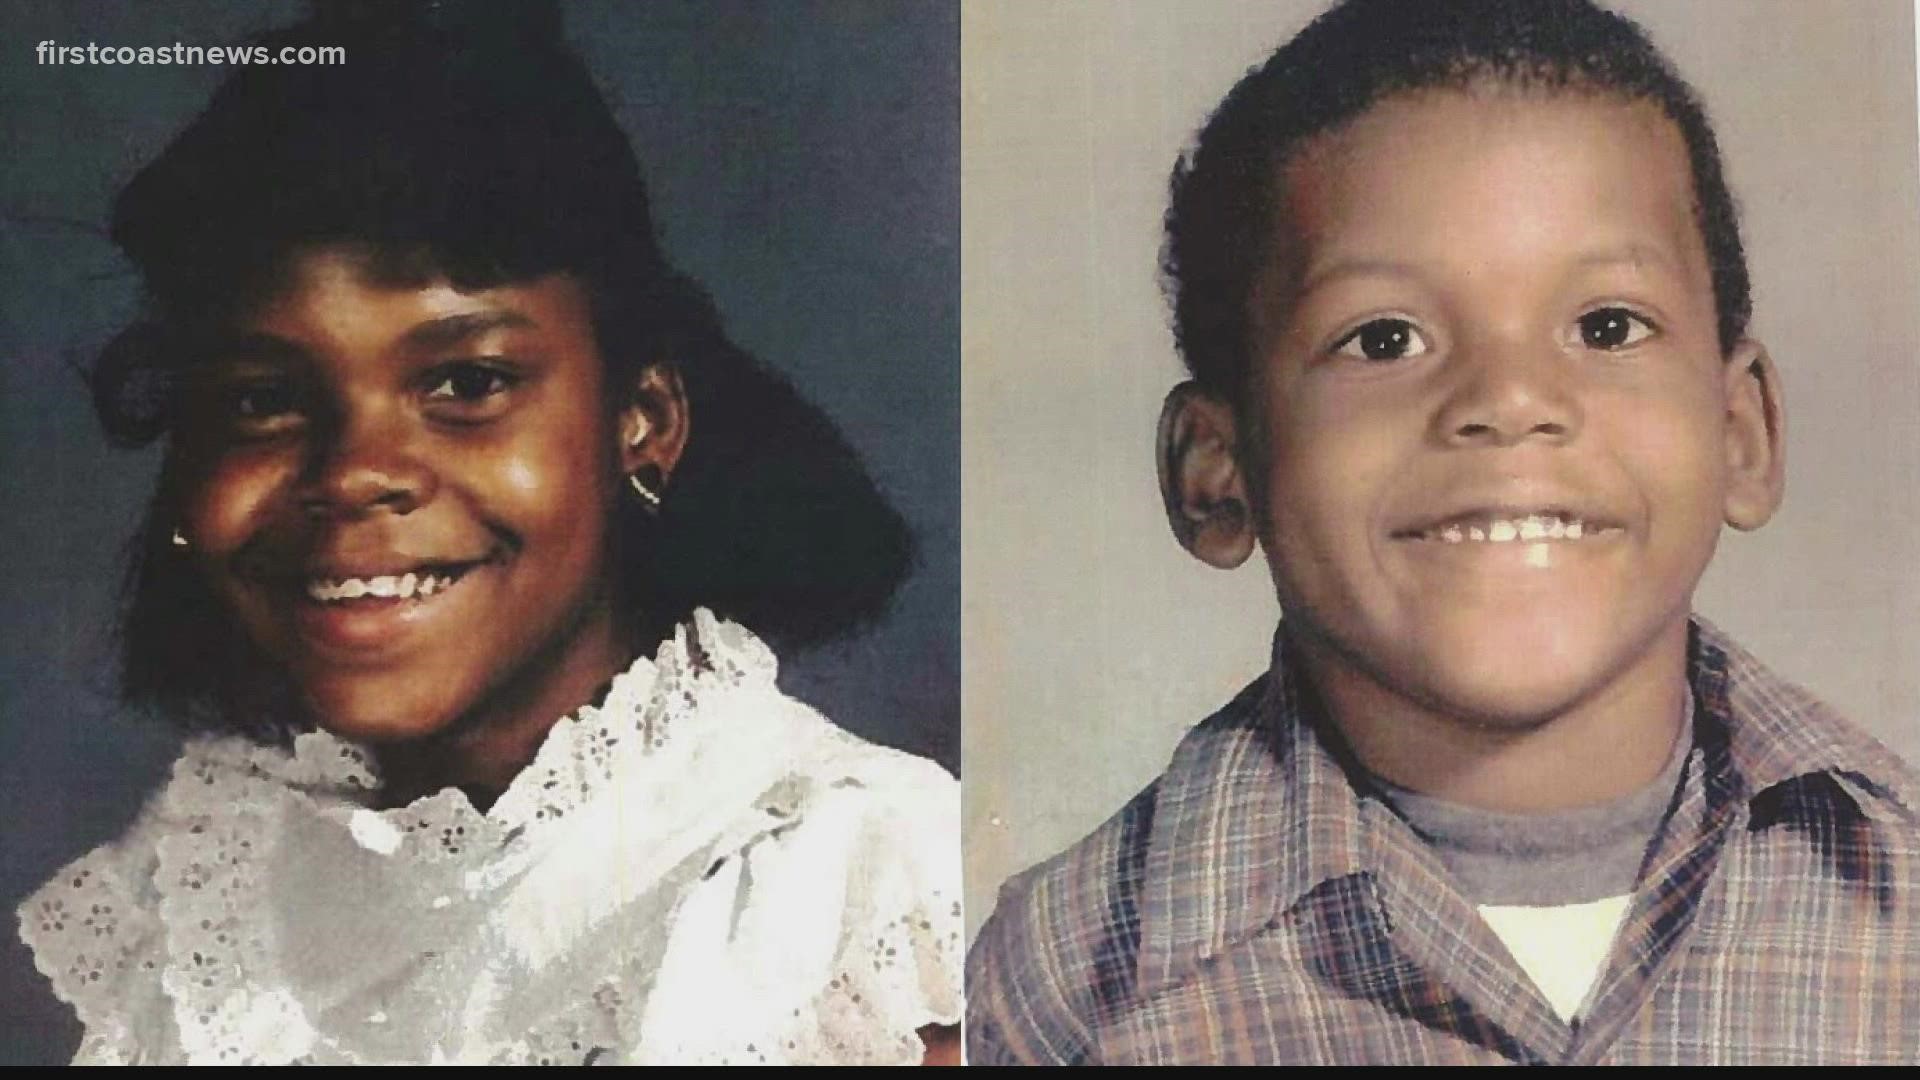 It’s been more than 30 years since the Pinkney children were murdered in their beds, but cold case detectives are determined to solve this case.